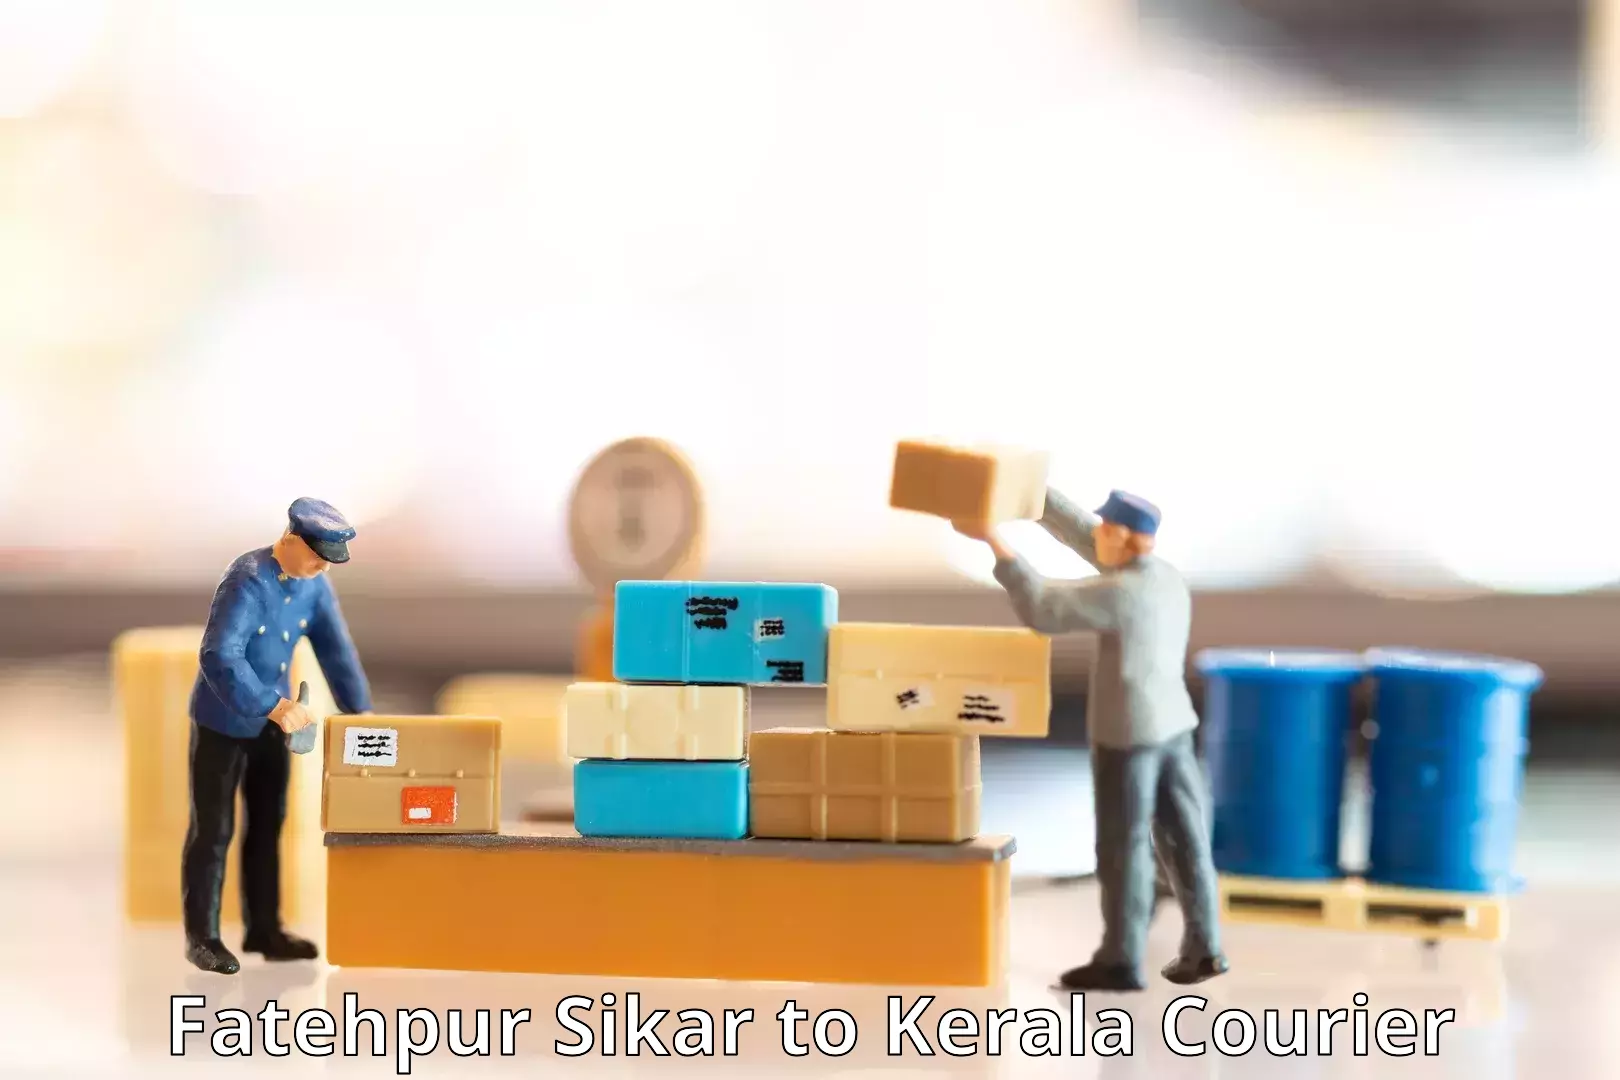 State-of-the-art courier technology Fatehpur Sikar to Kerala